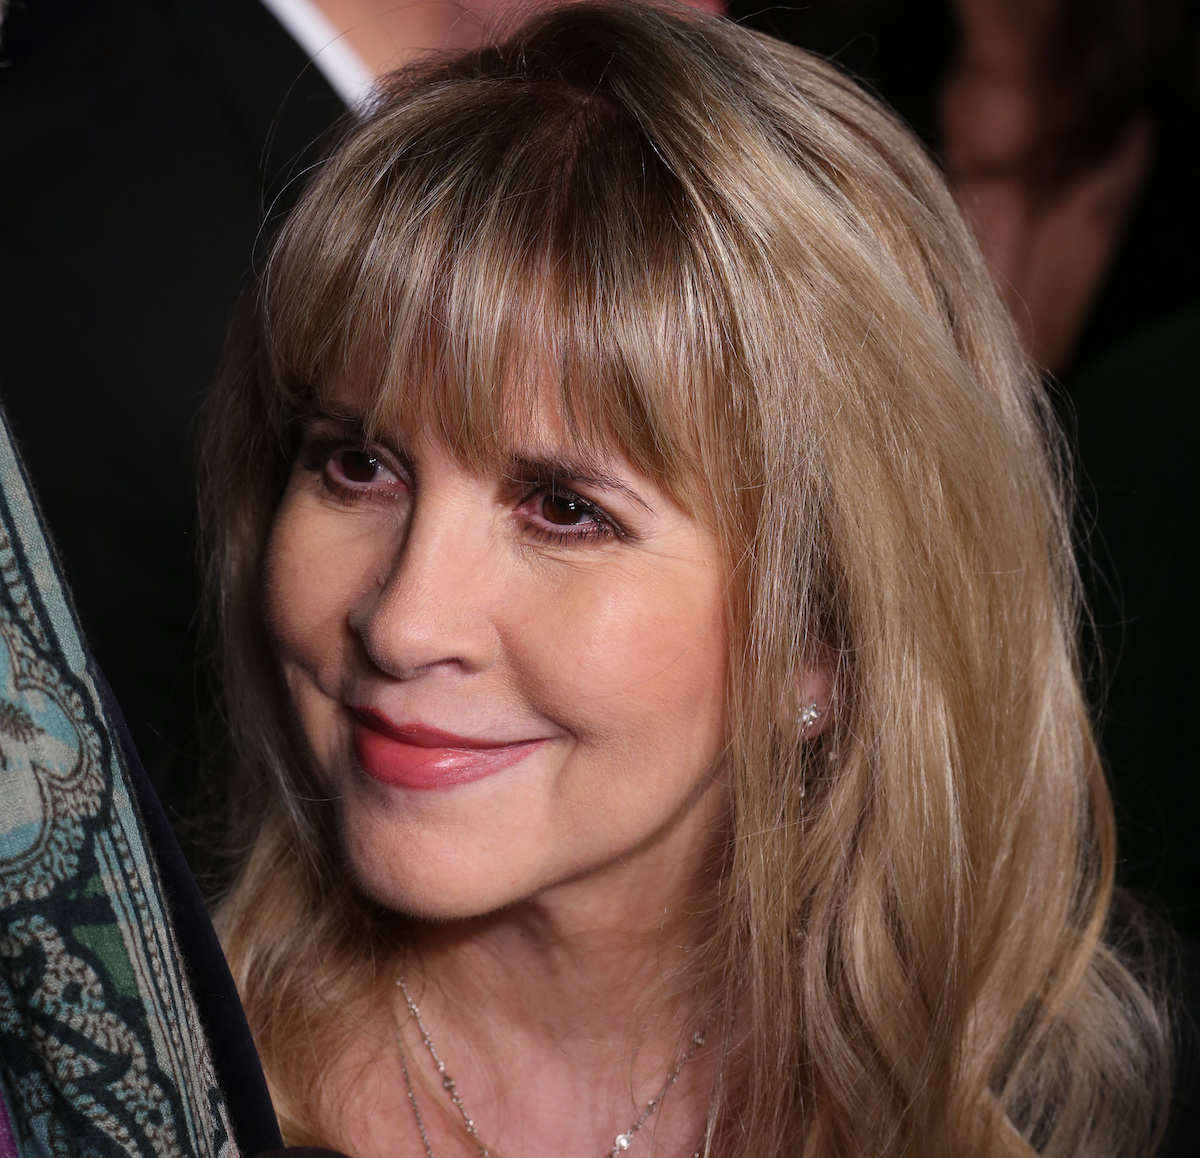 Musician Stevie Nicks attends the Broadway Opening Night Performance of 'School of Rock' in 2015